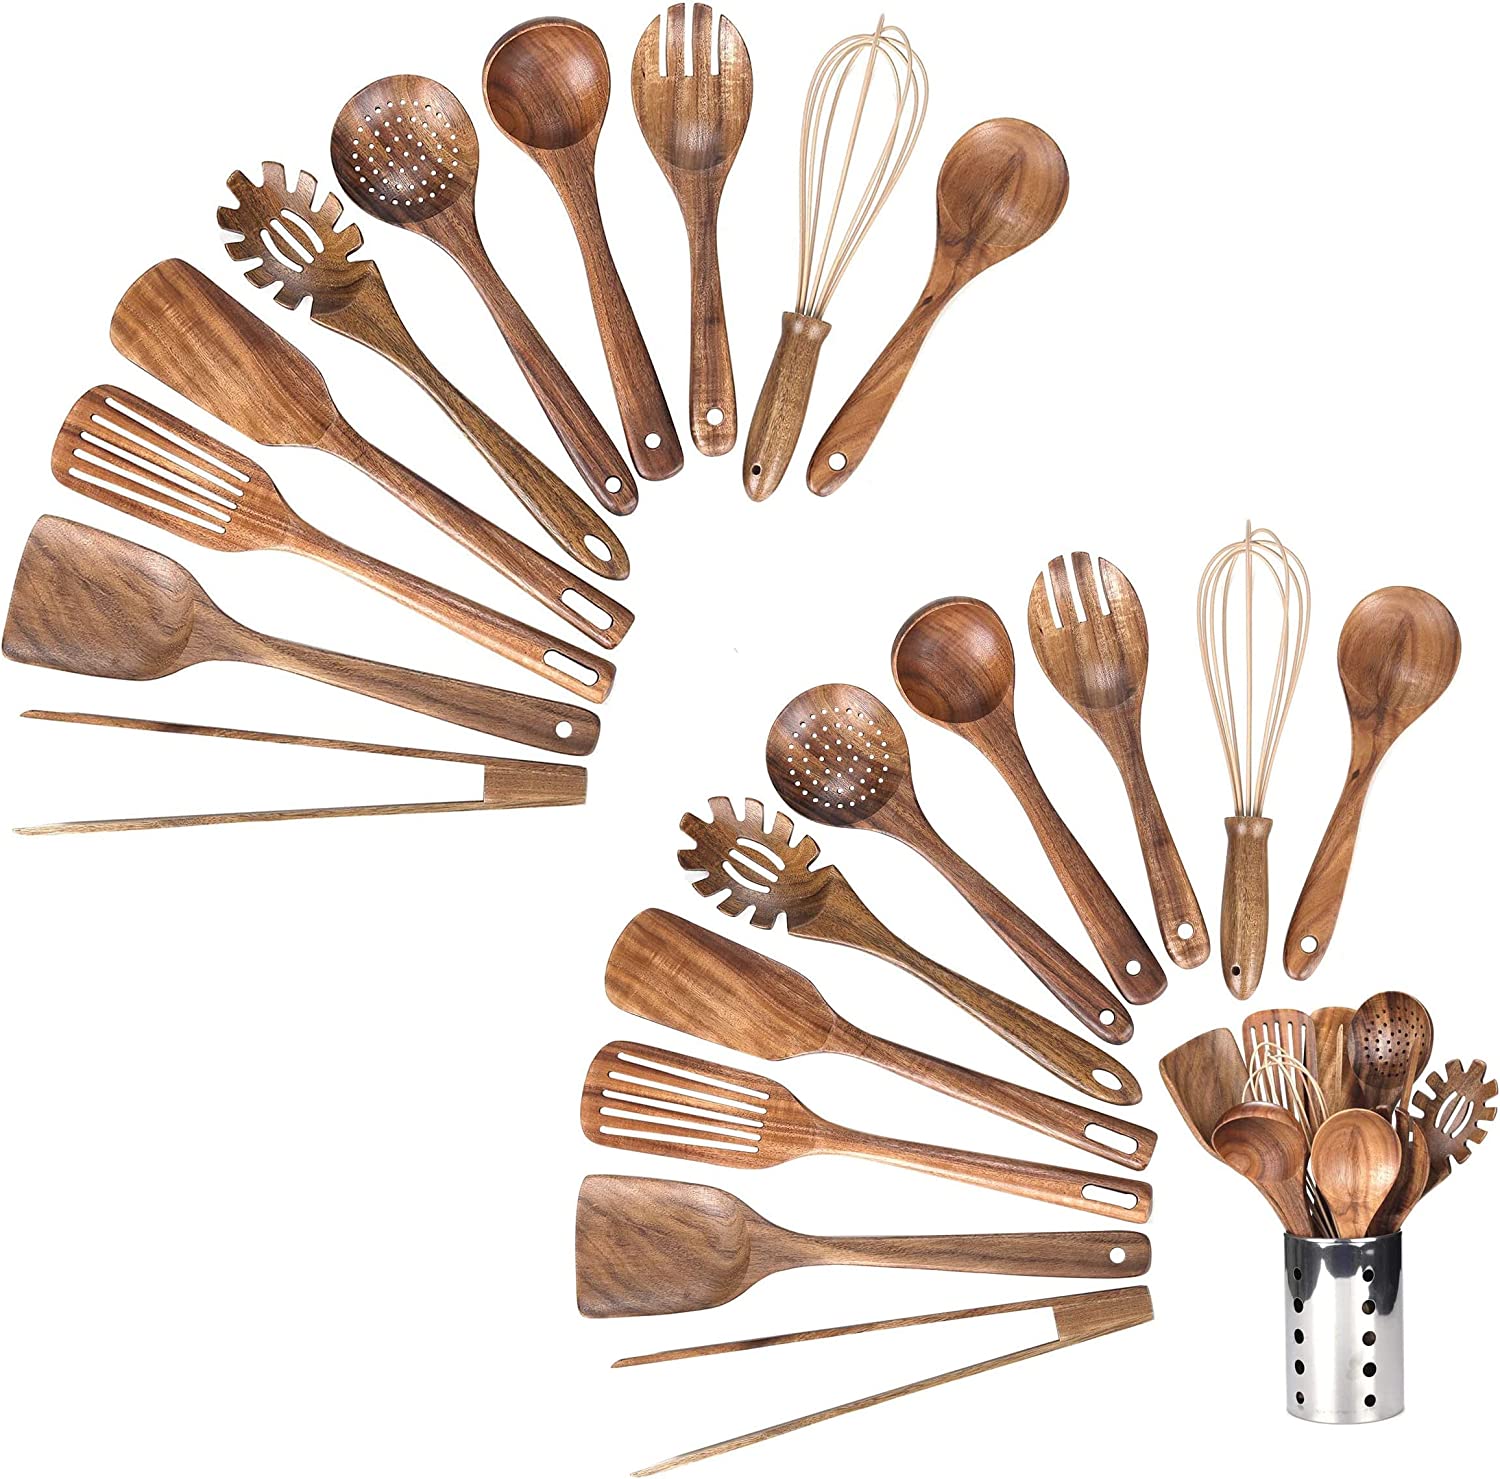 21 Pack Wooden Spoons Set with Holder Wood Kitchen Cooking Nonstick Utensil Set